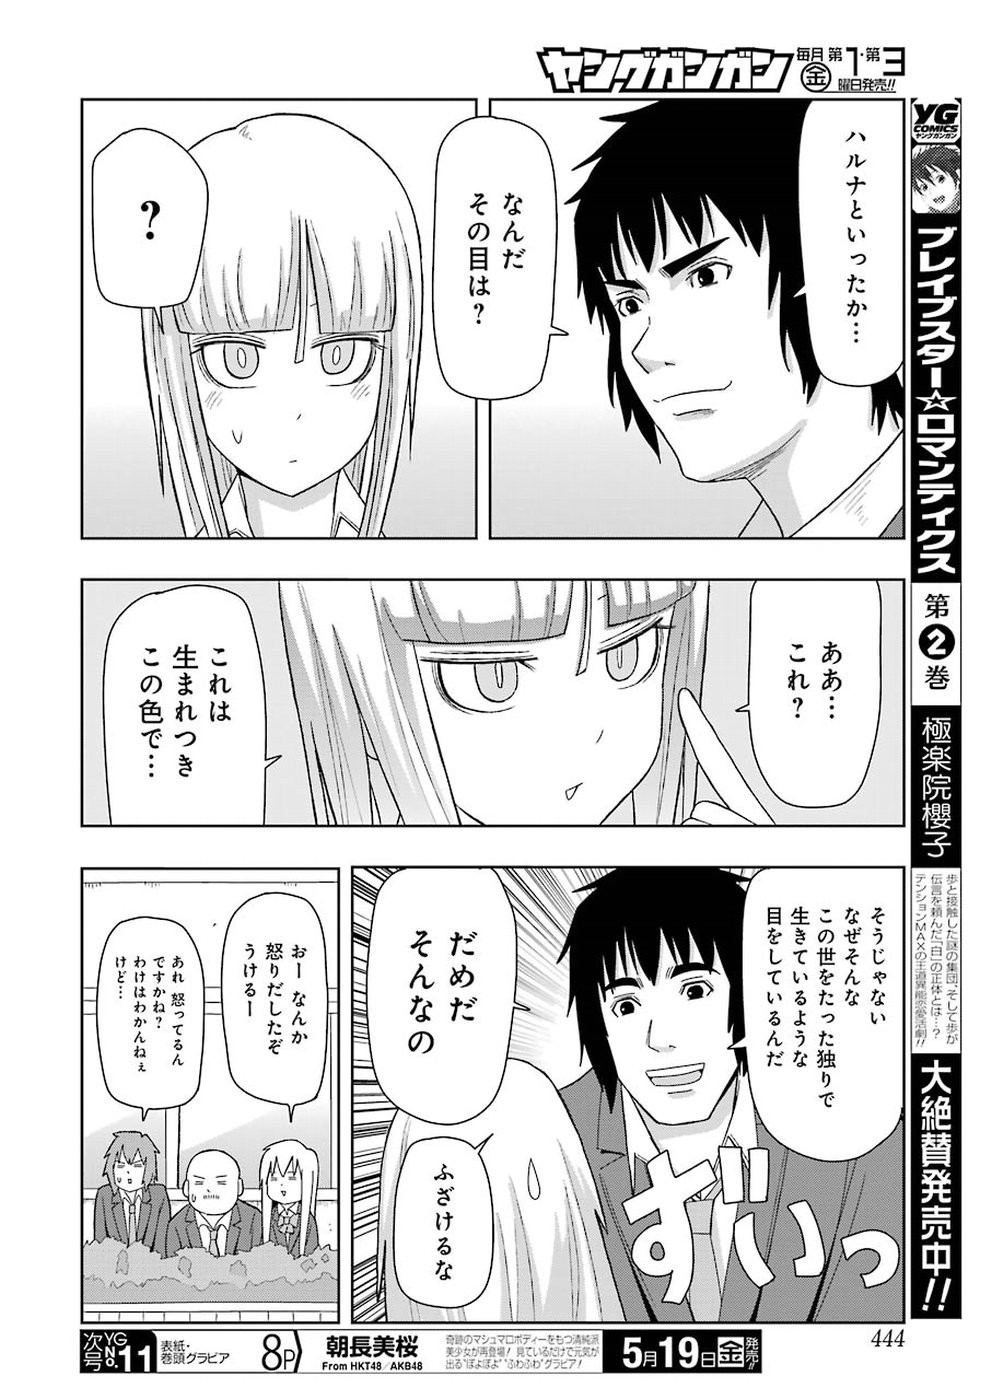 + Tic Nee-san - Chapter 146 - Page 4